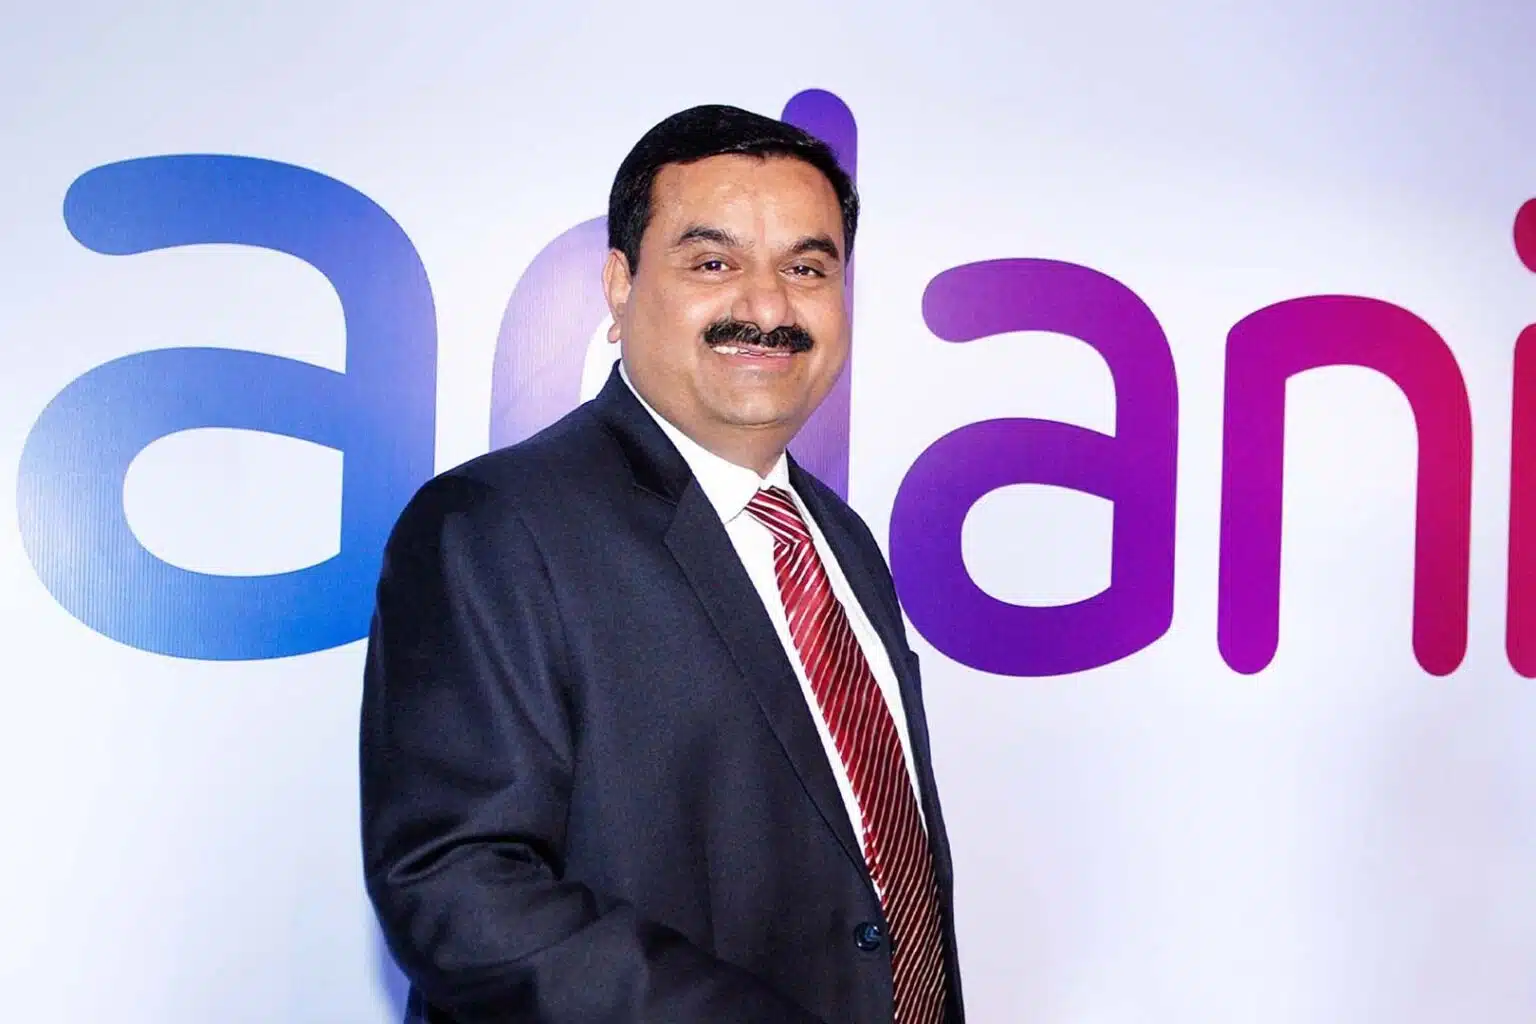 Adani to rely on global banks for funding, as debt piles upto 21% - Asiana Times